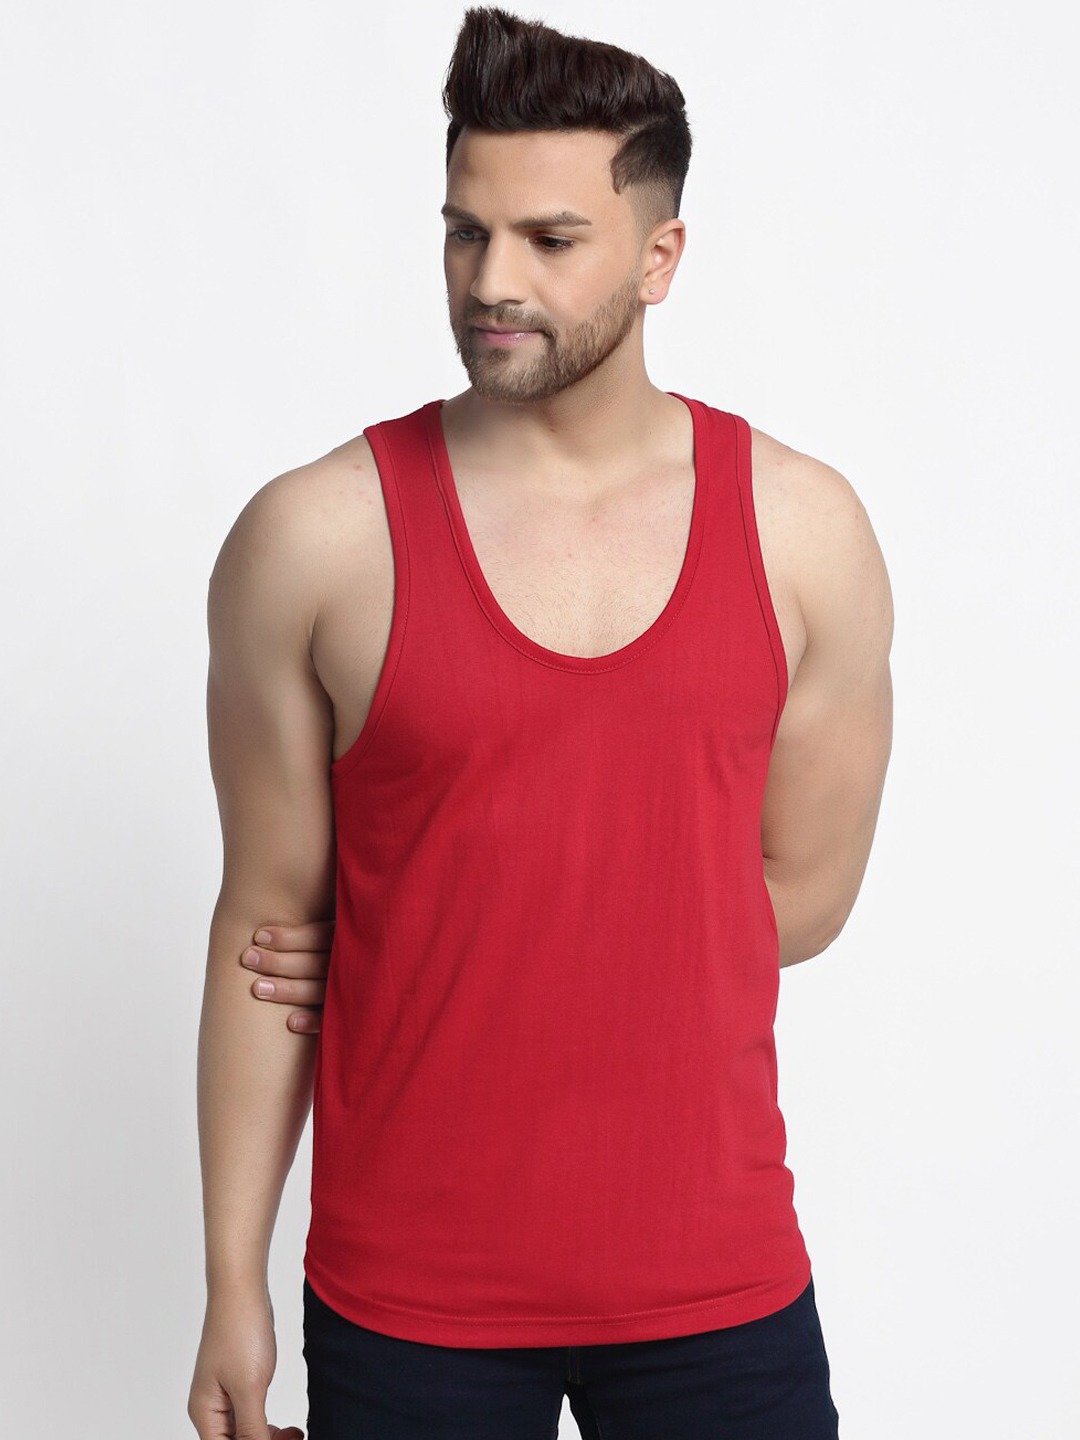 Clothing Innerwear Vests | Friskers Men Pack Of 2 Solid Pure Cotton Gym Vests - IU59342